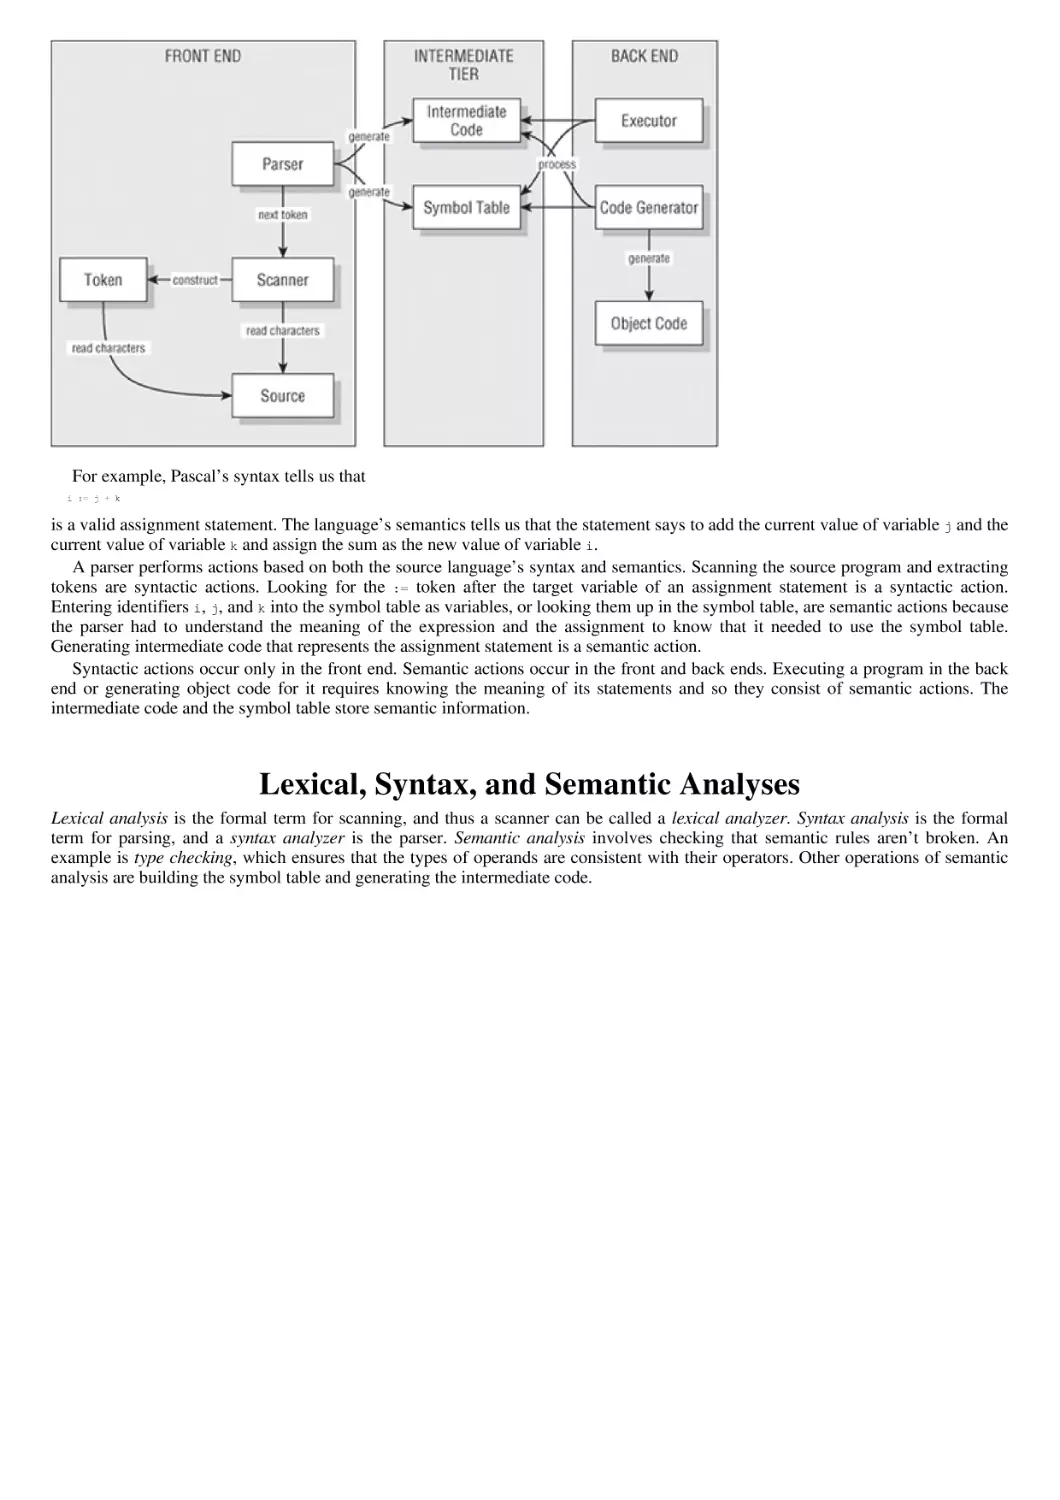 Lexical, Syntax, and Semantic Analyses